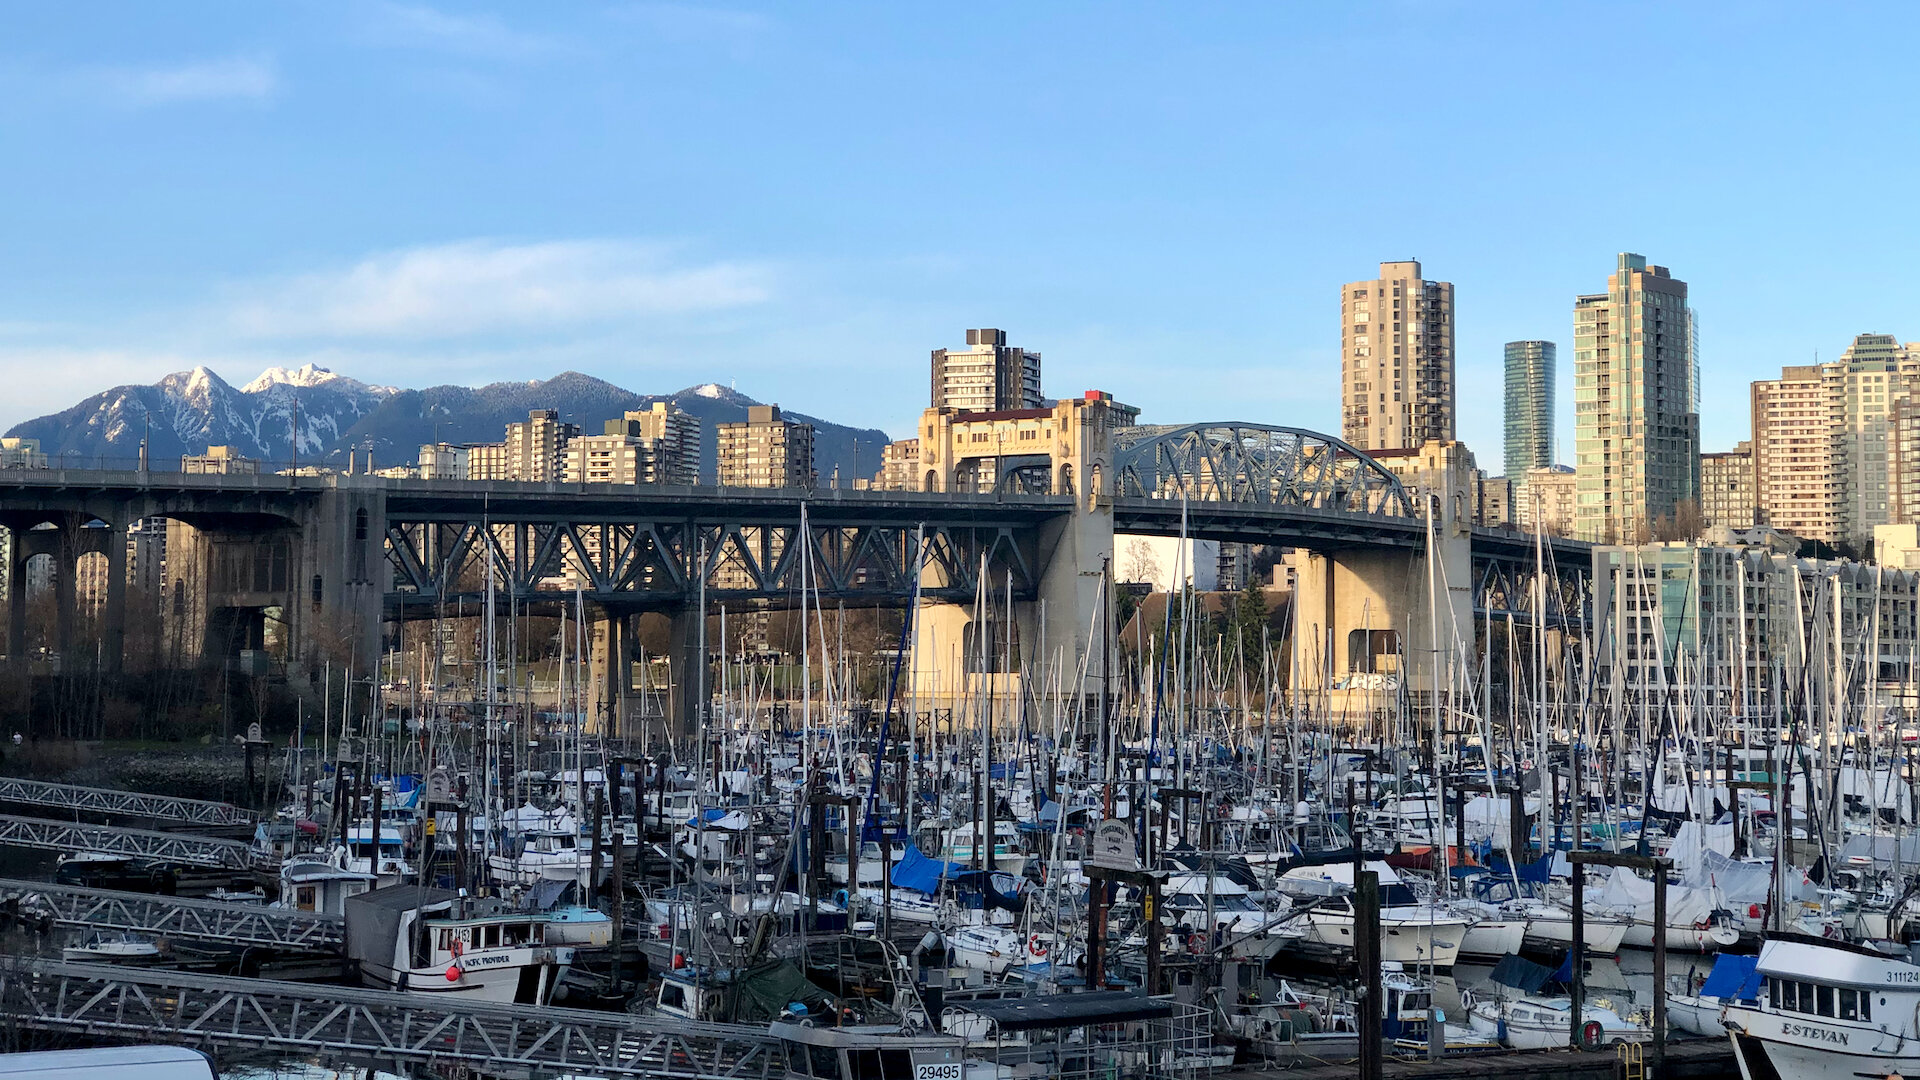  Burrard Street bridge, and a bit of snow on the local mountains. 